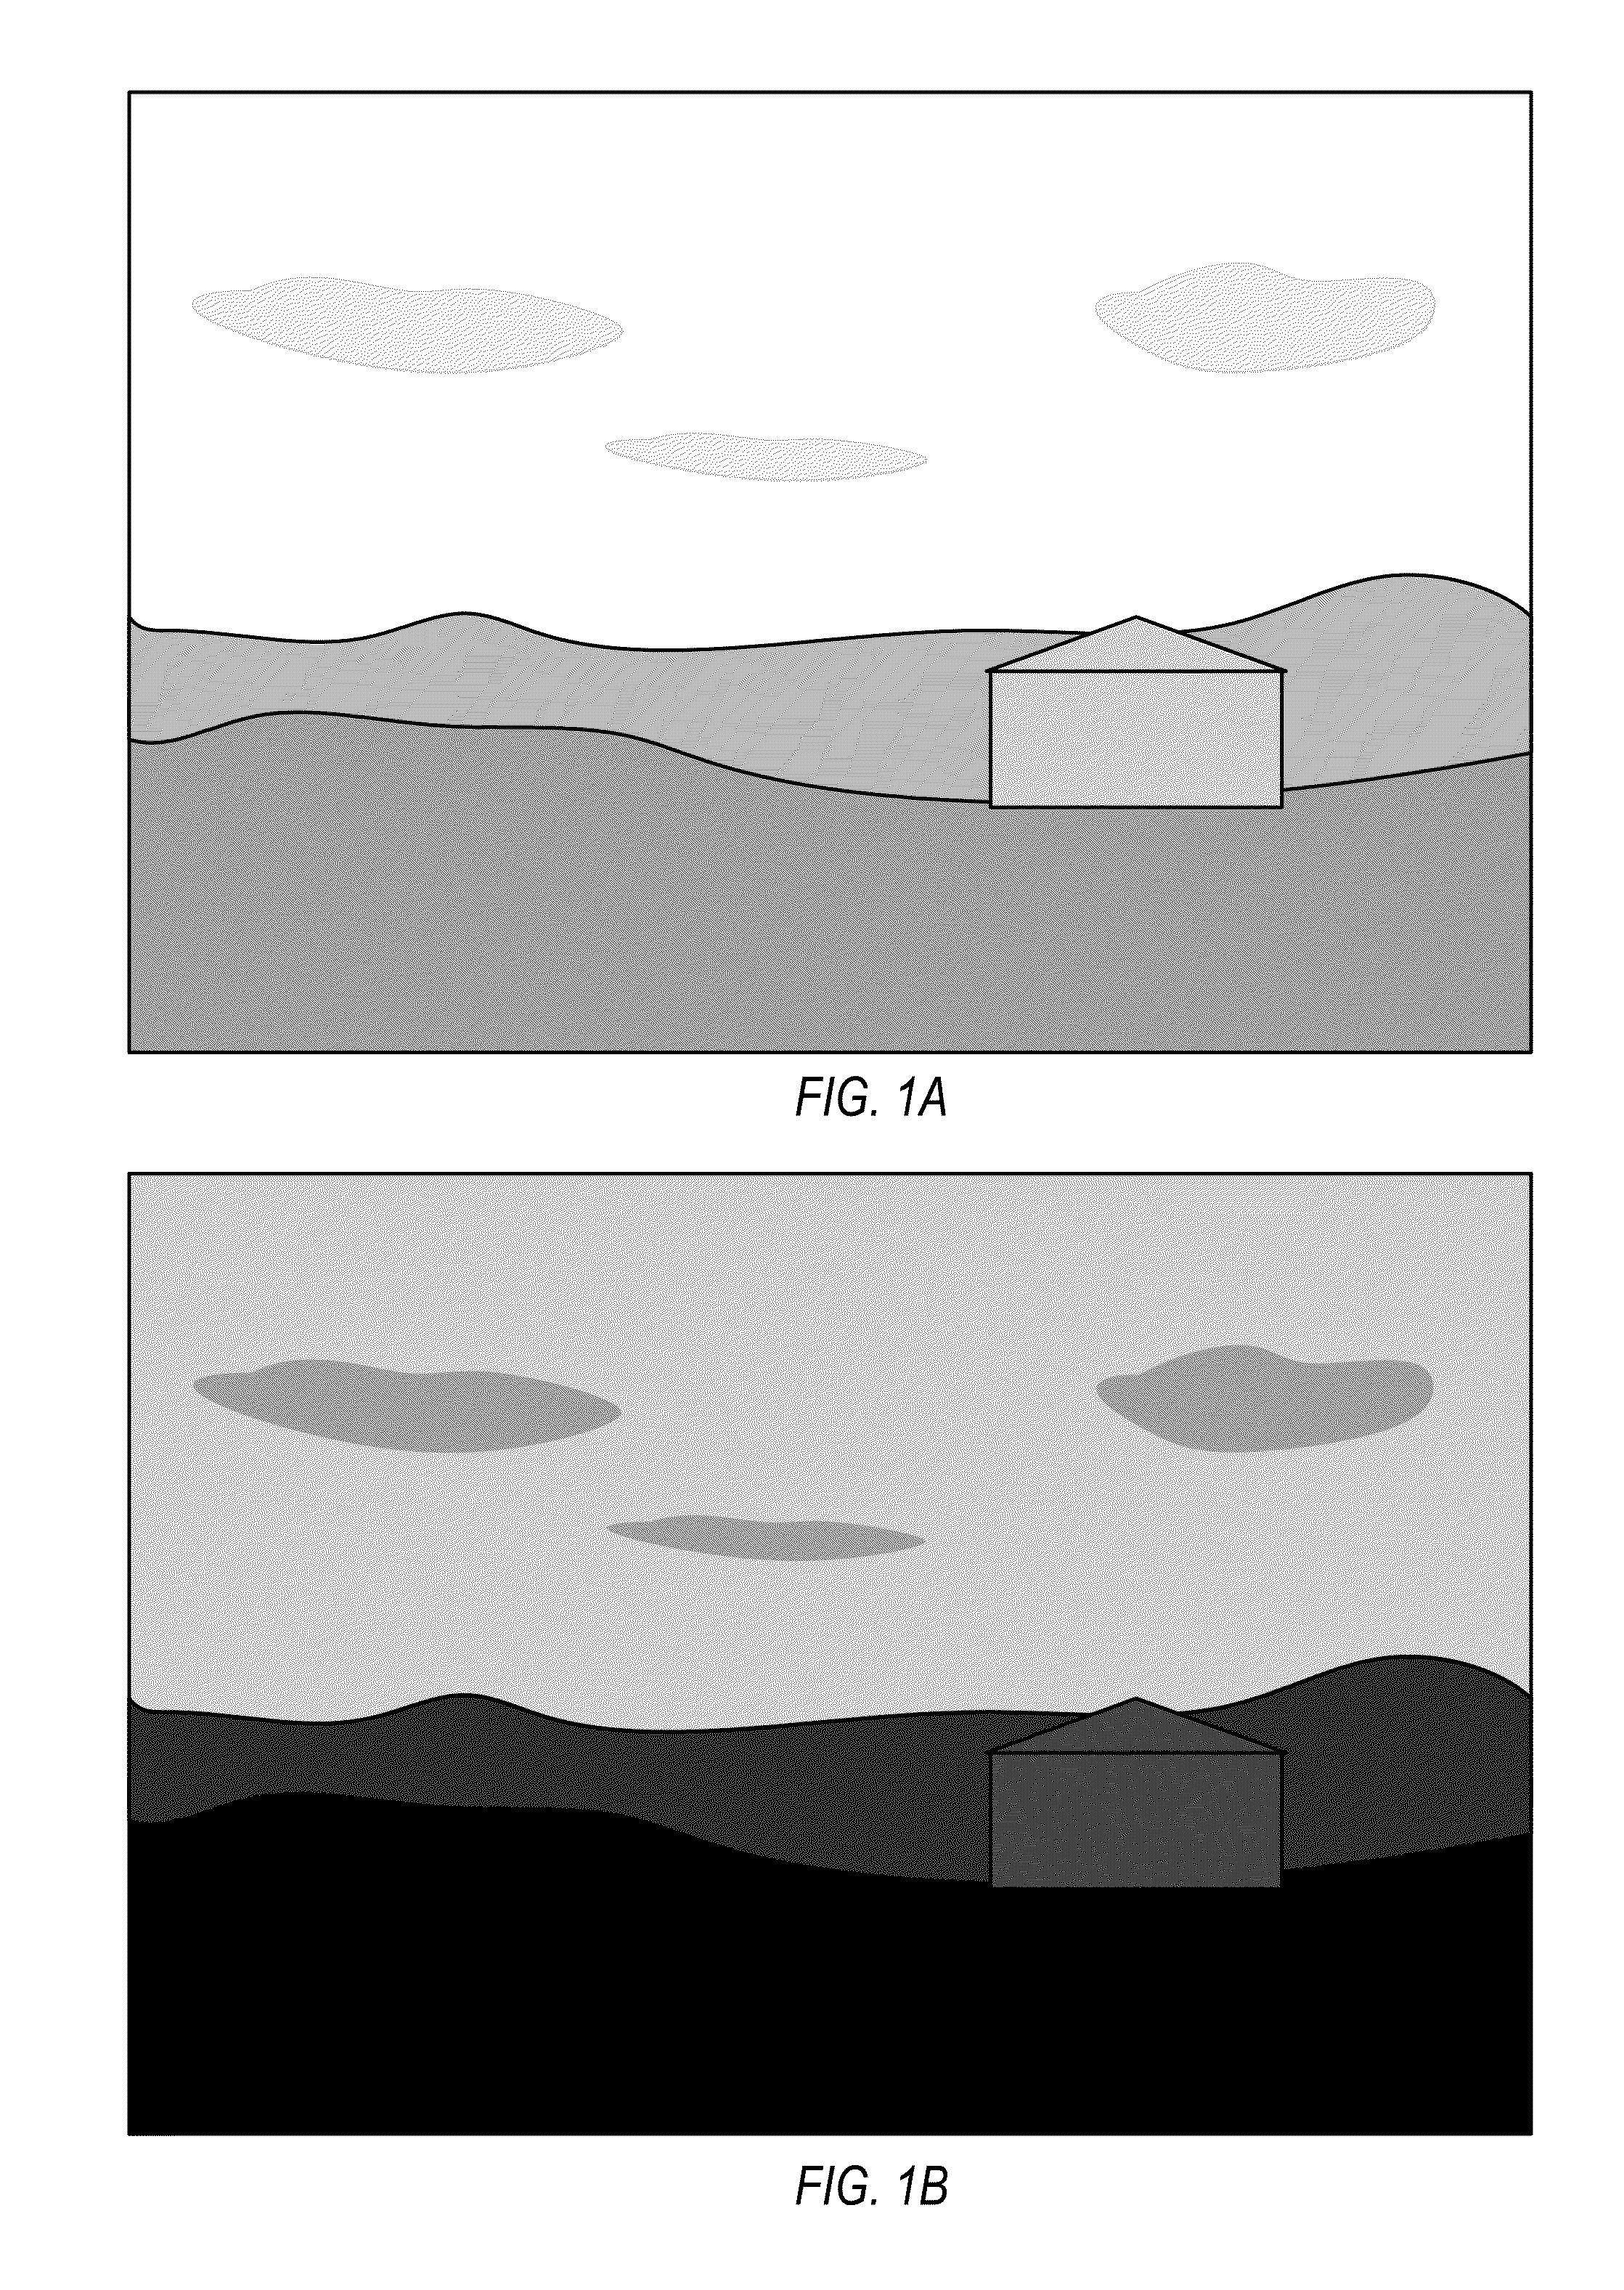 Methods and apparatus for blending images